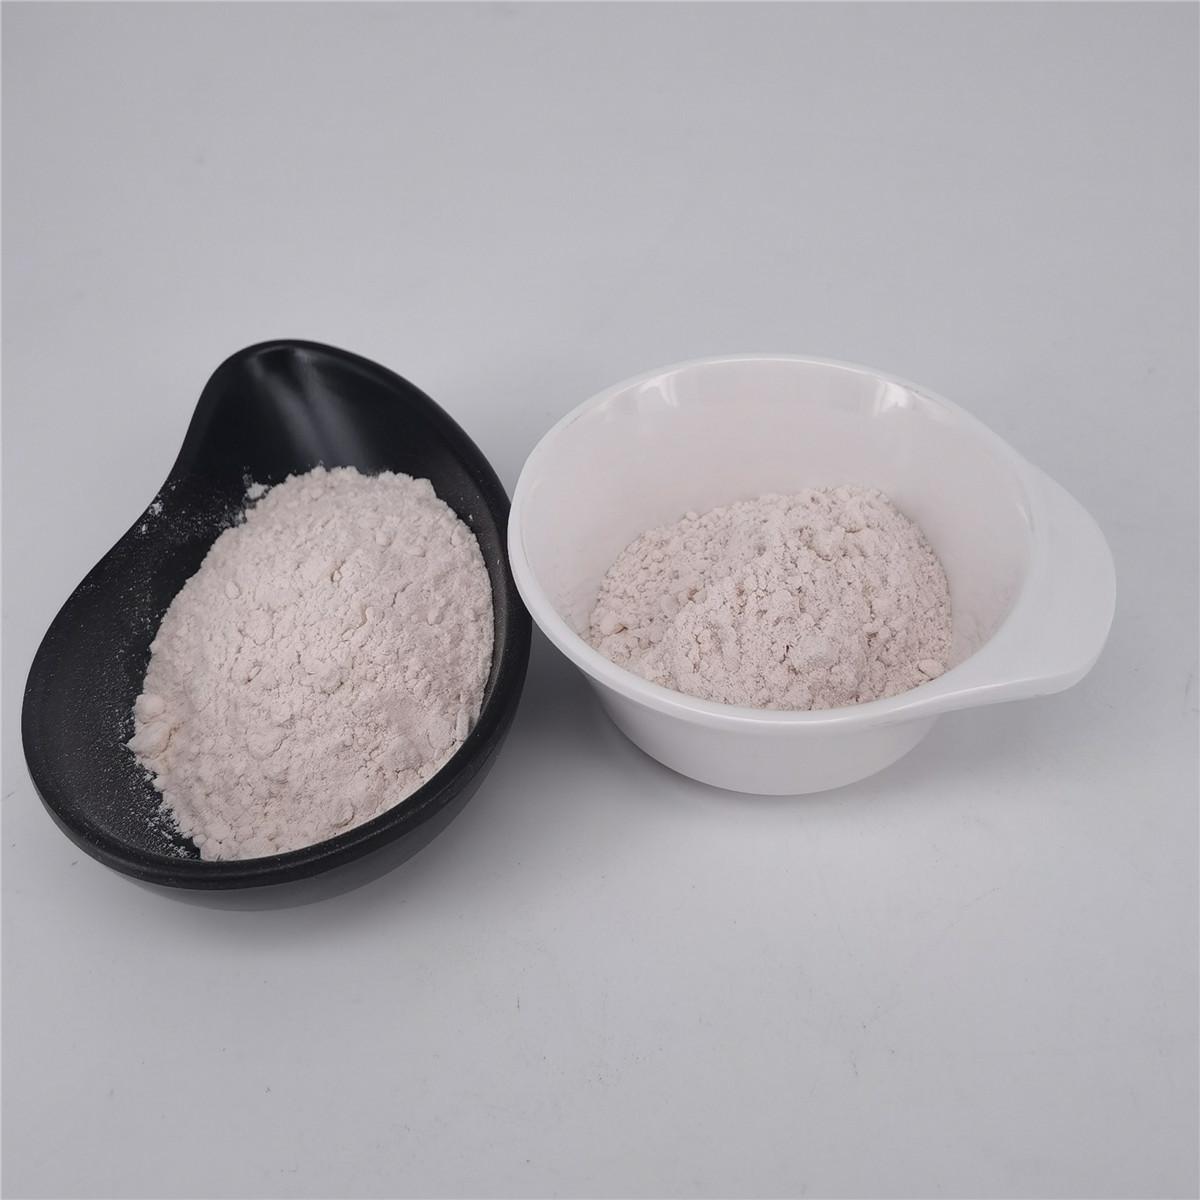  High Purity SOD Superoxide Dismutase Powder 9054-89-1 Manufactures